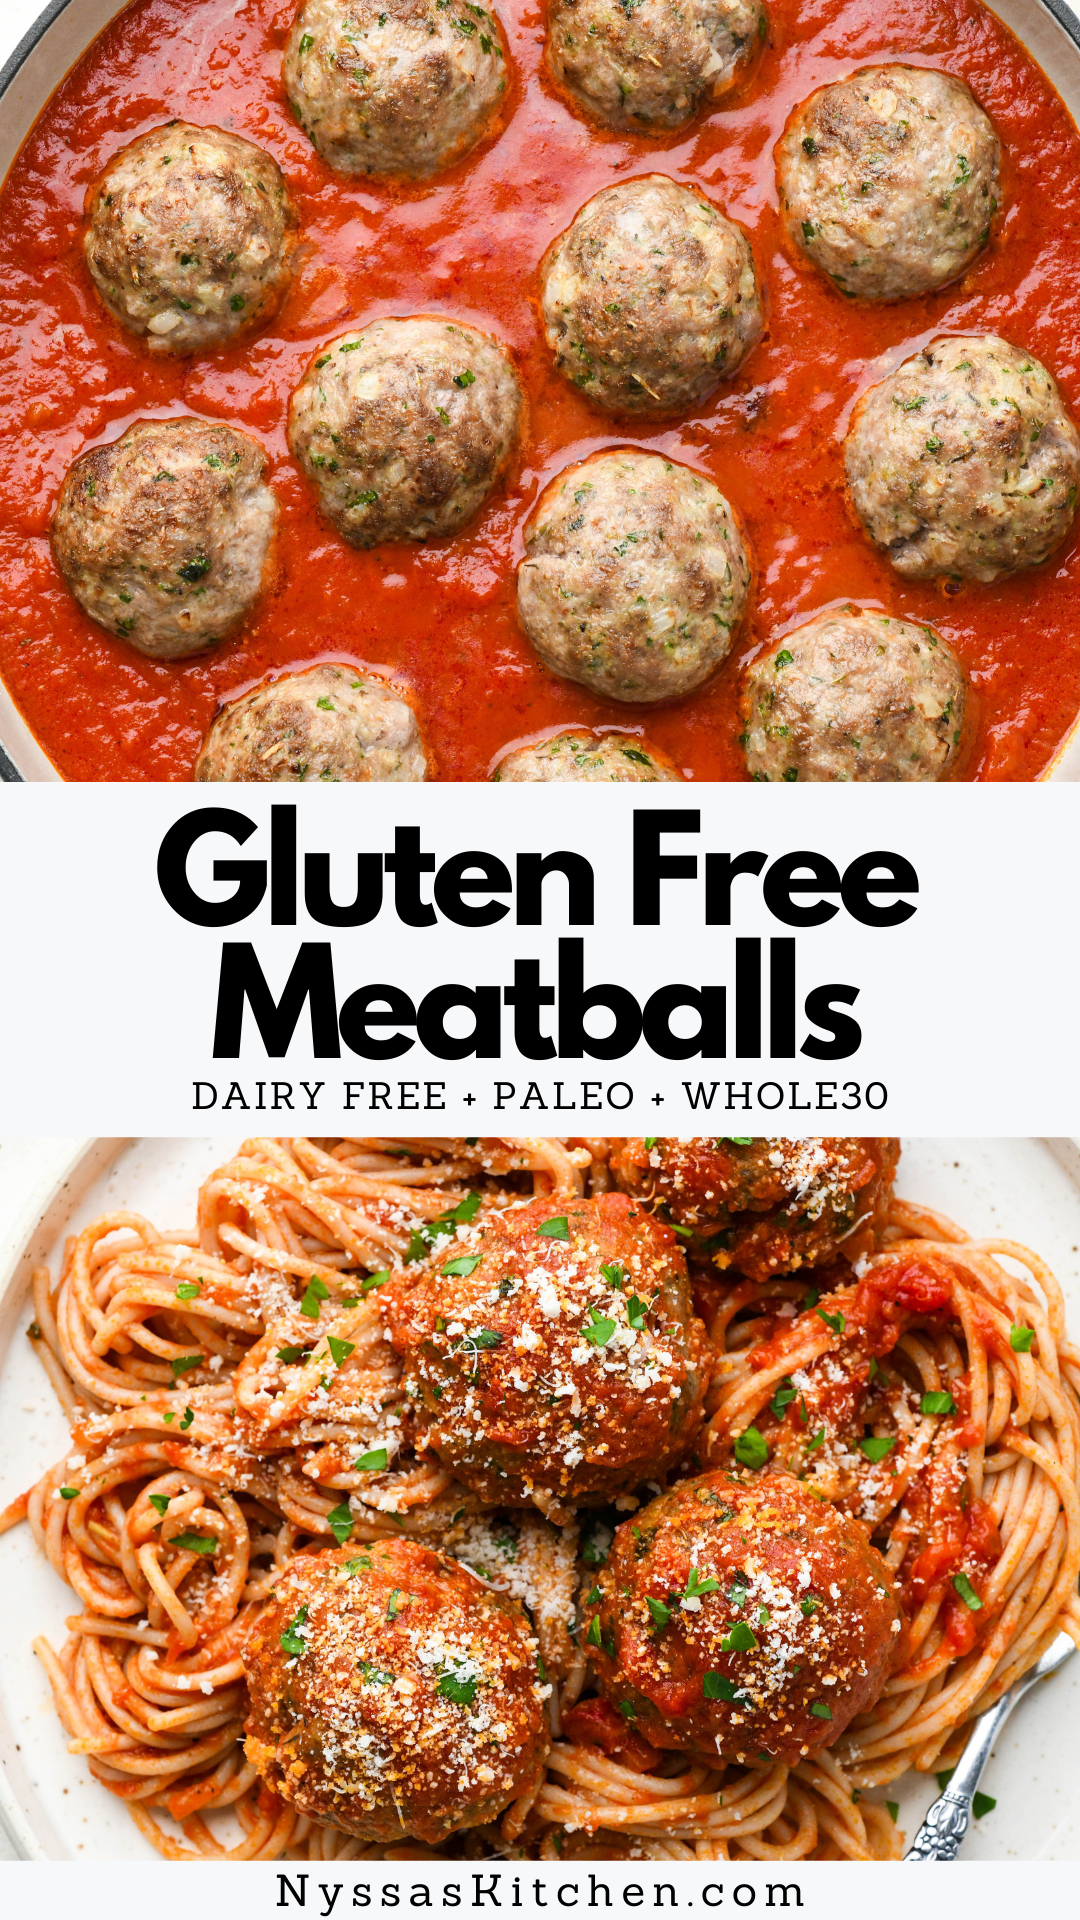 These gluten free meatballs are the perfect healthy comfort food! Made without breadcrumbs and just a handful of simple ingredients like ground beef, ground pork, almond flour, onions, parsley, and a flavorful blend of seasonings. The perfect thing to make when you're craving a hearty Italian inspired dinner! Gluten free, dairy free, paleo, Whole30 option.